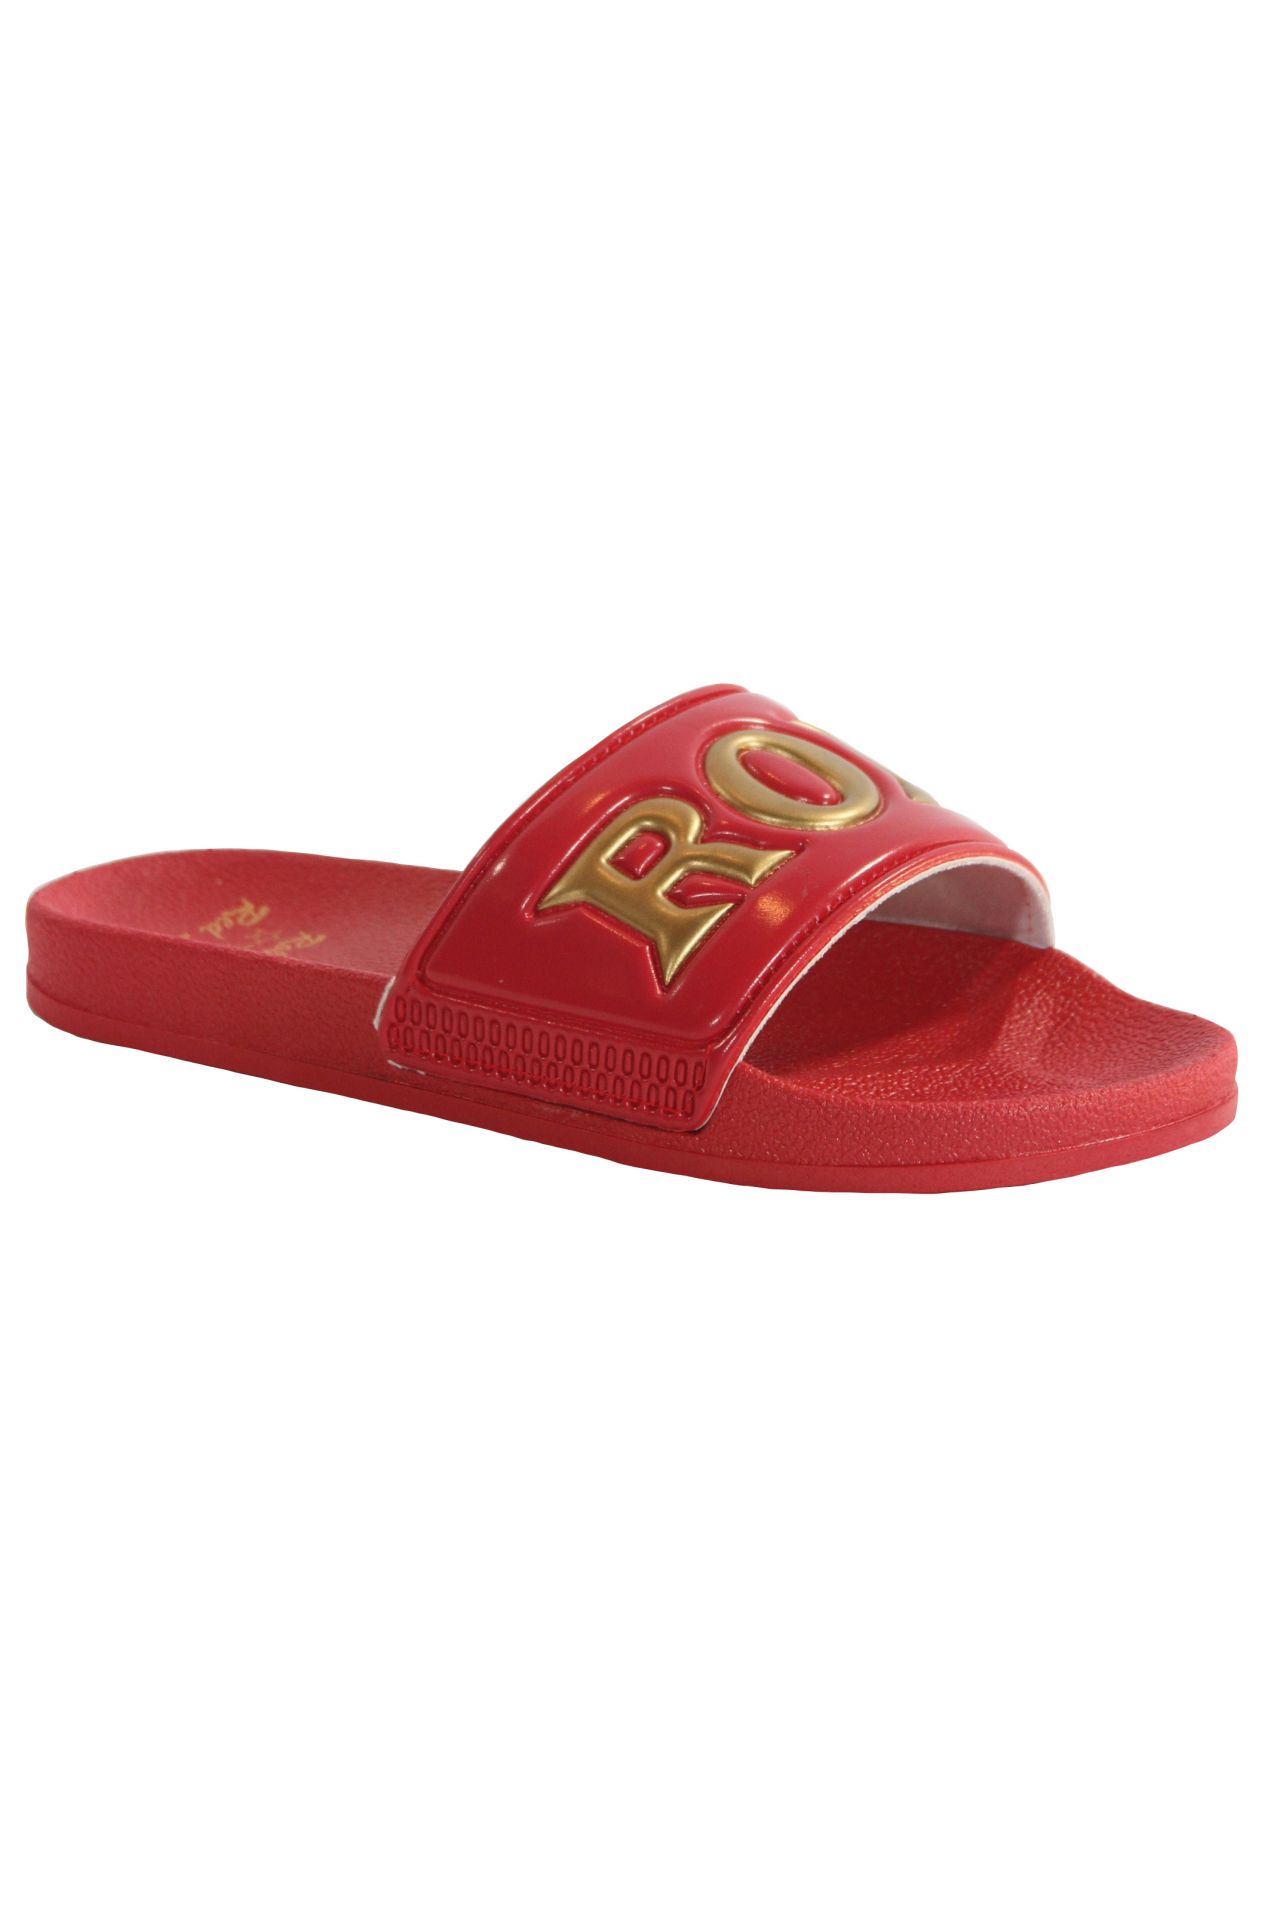 ROBIN SLIDES IN RED AND GOLD